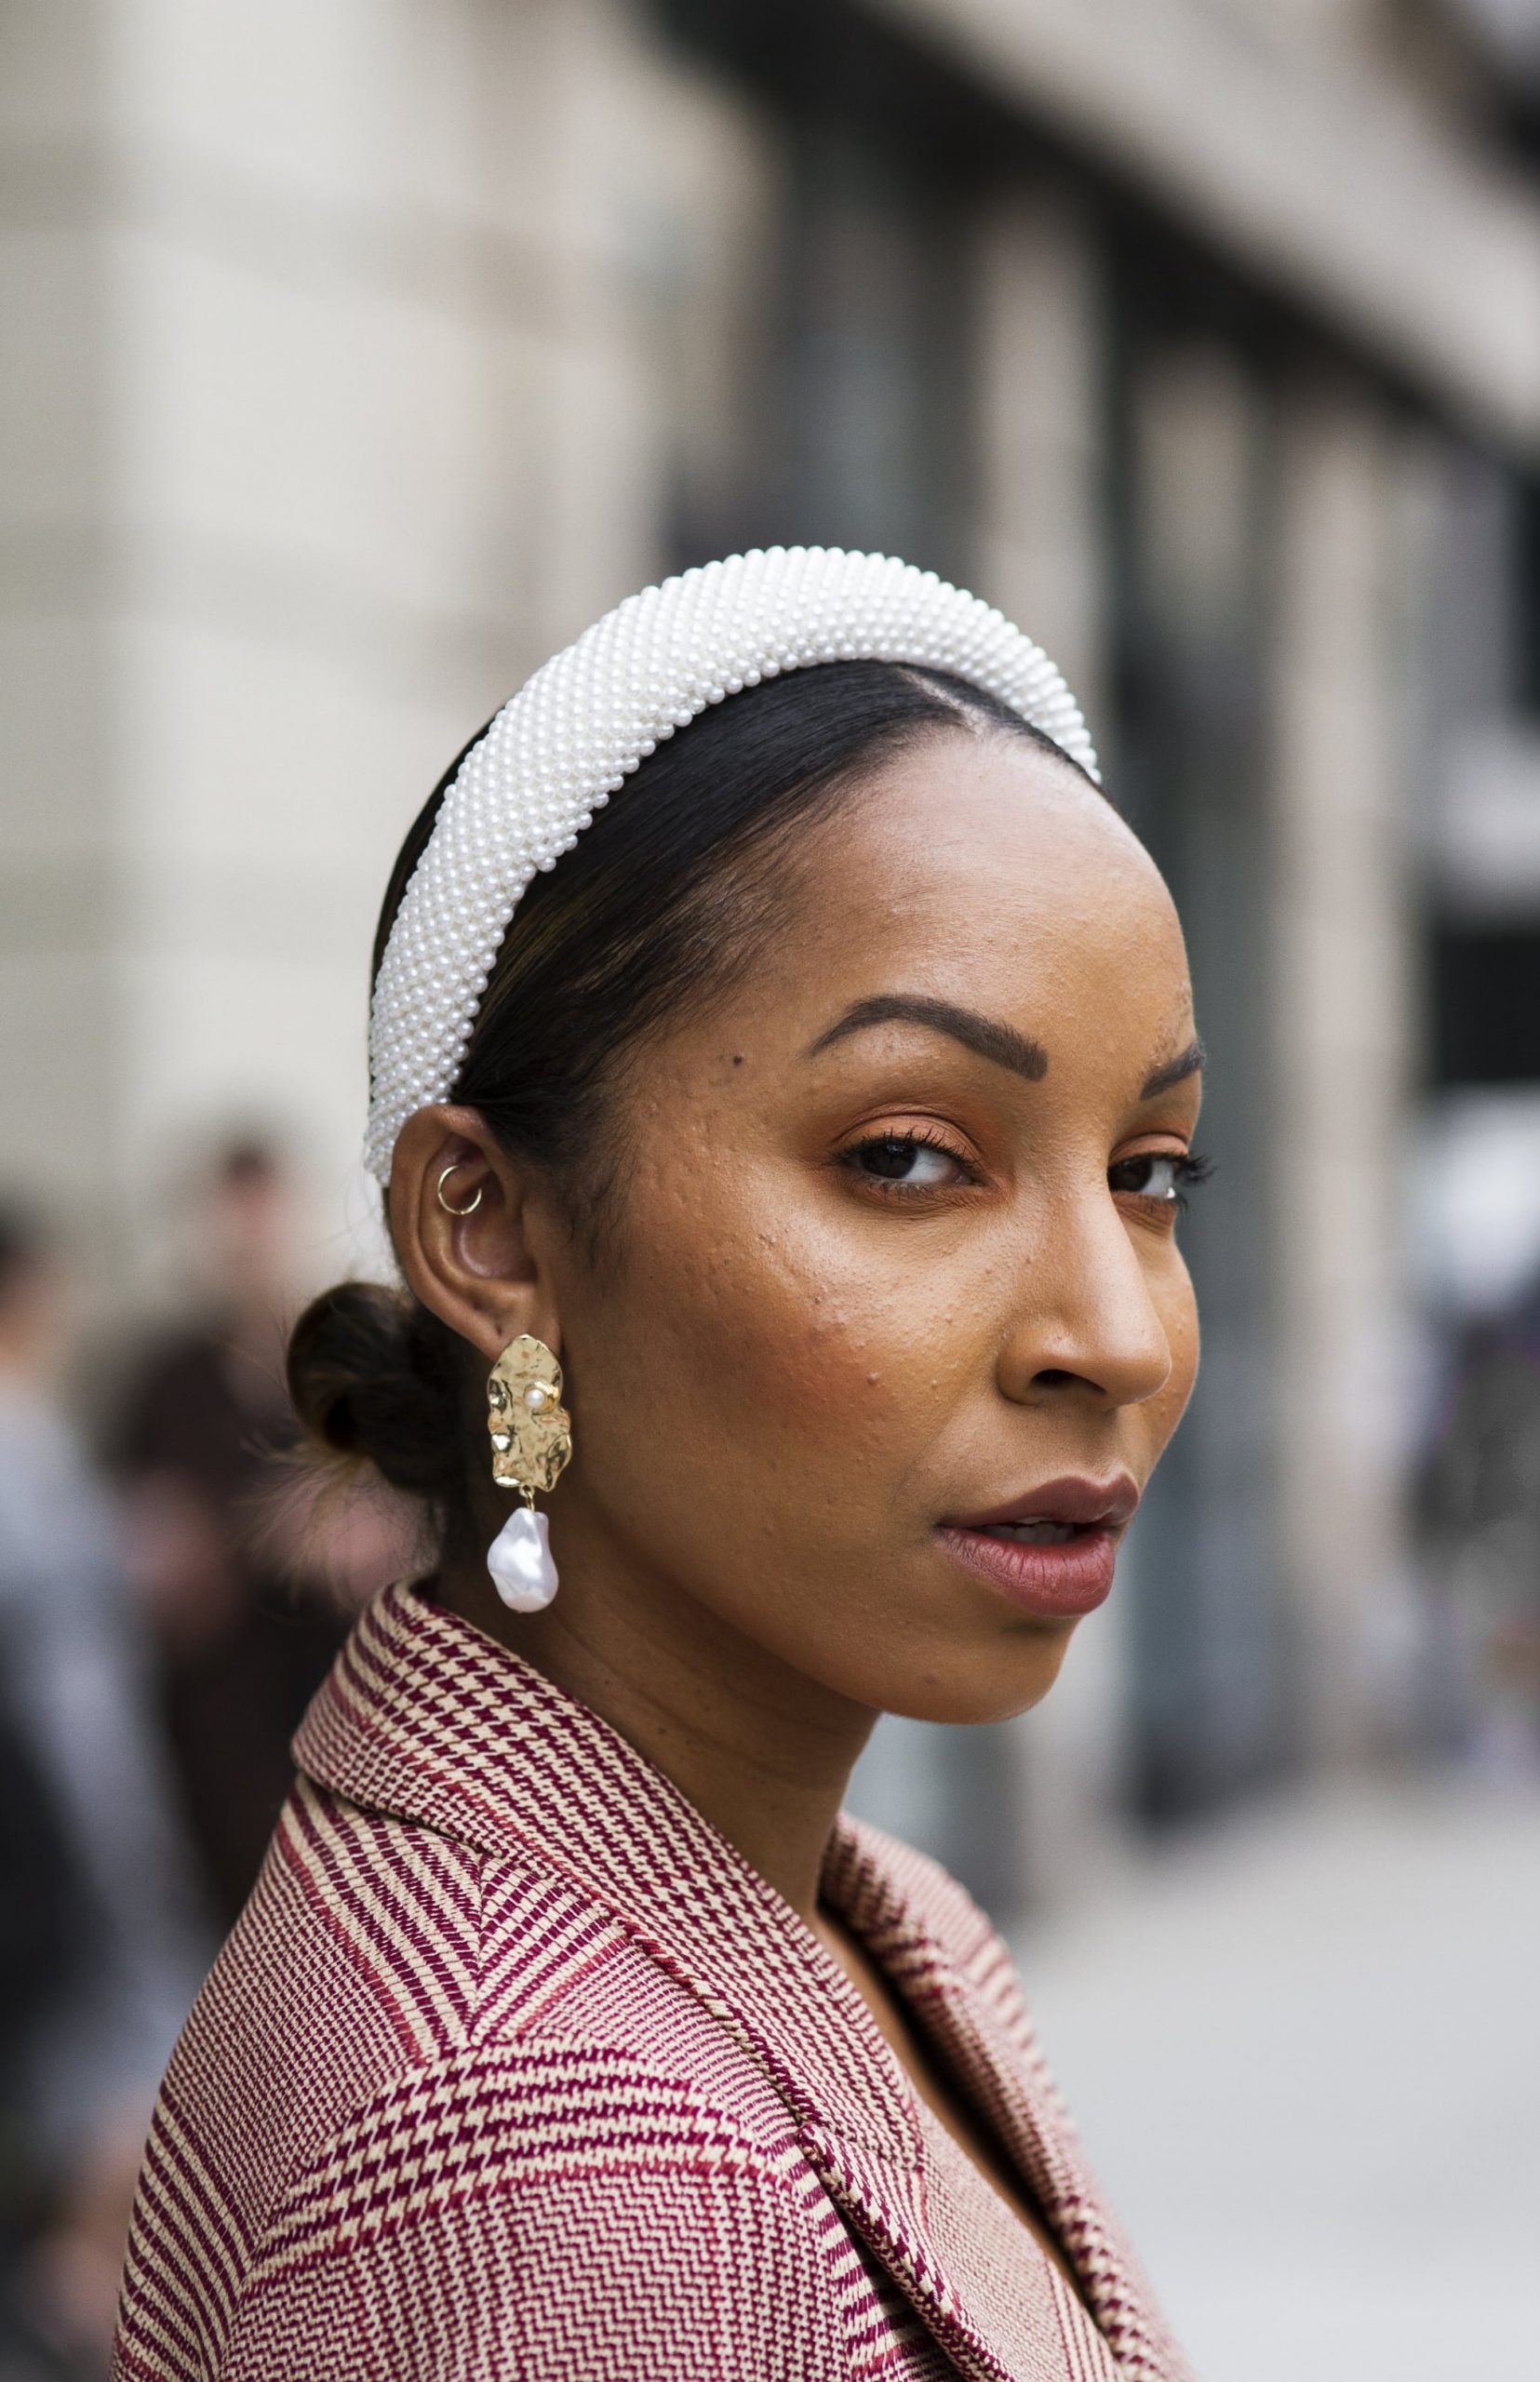 If You’re Going to Try 1 Hair Accessory Trend This Year, Make it the White Headband